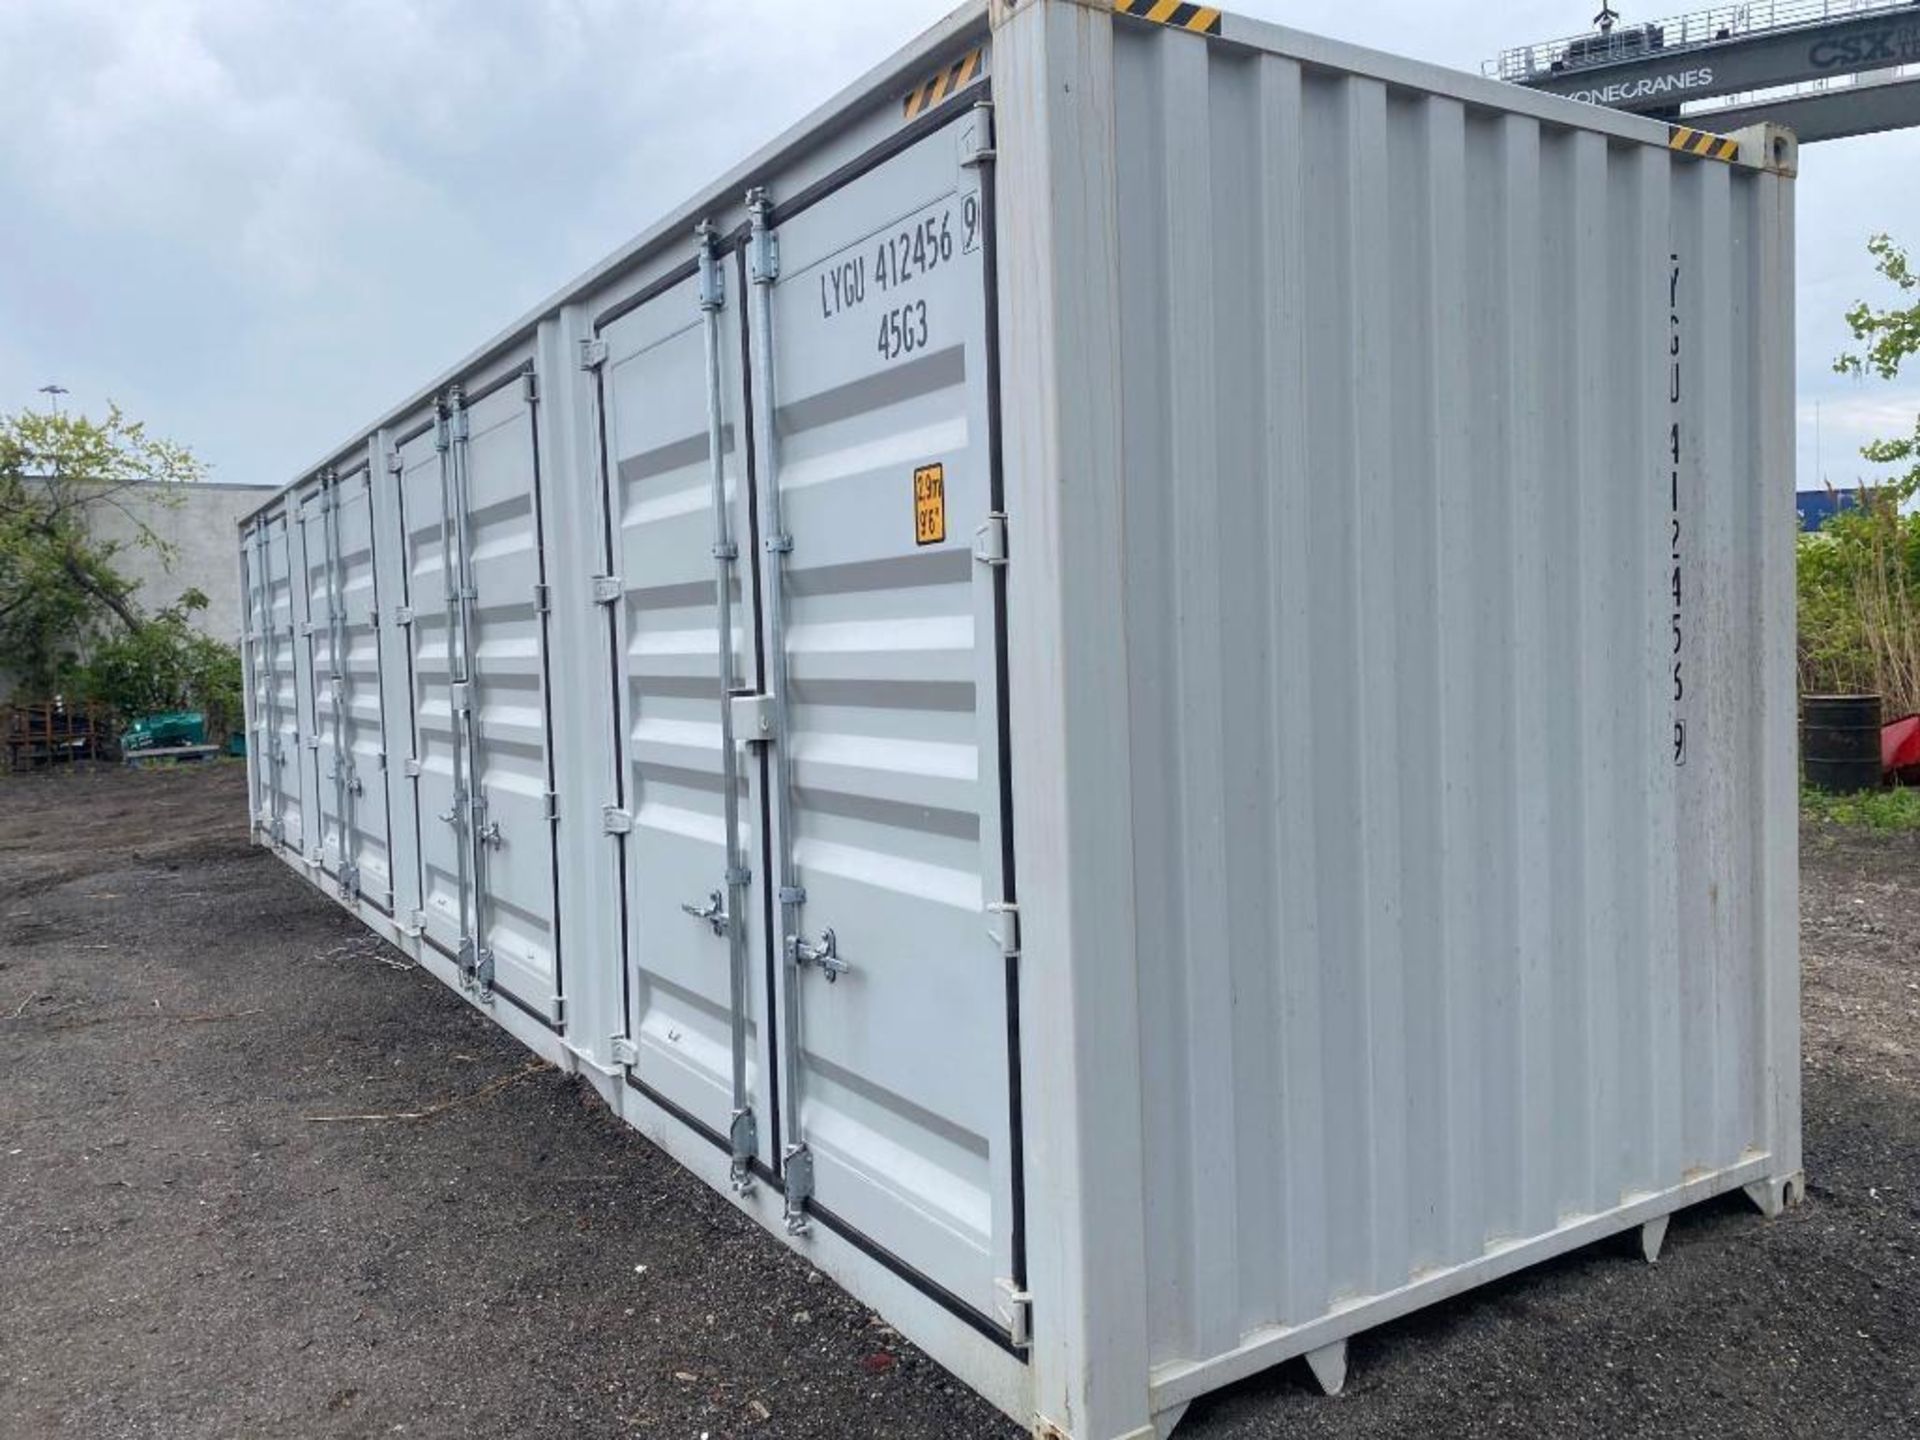 New Dong Fang International 40ft (4 side door) Steel Shipping/Storage Container - Image 5 of 6